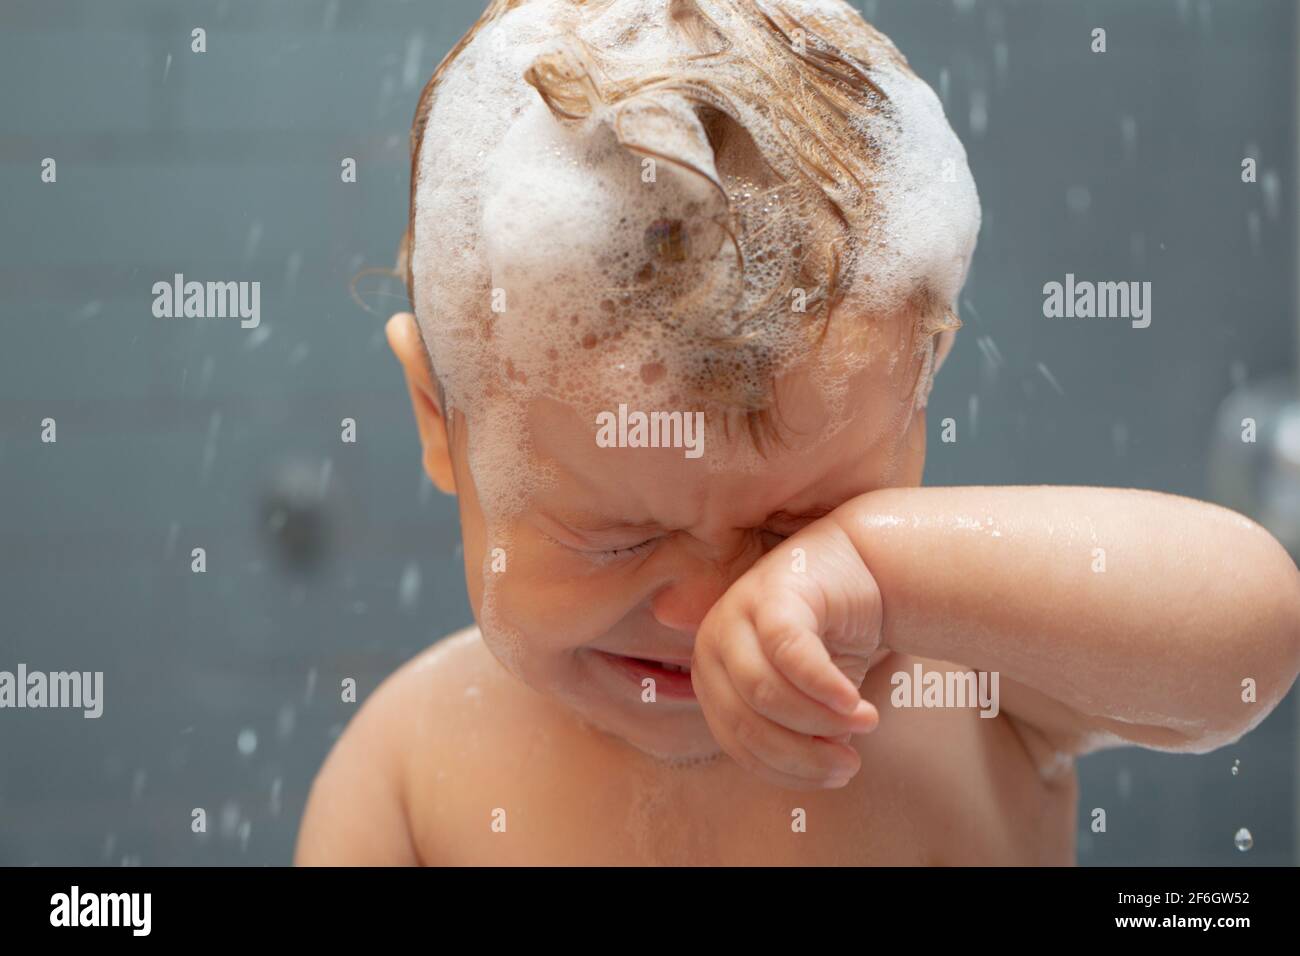 Washing adorable baby in bathroom. Kid with soap suds on hair taking bath.  Closeup portrait of smiling kid, health care and kids hygiene. Kid bathing  Stock Photo - Alamy